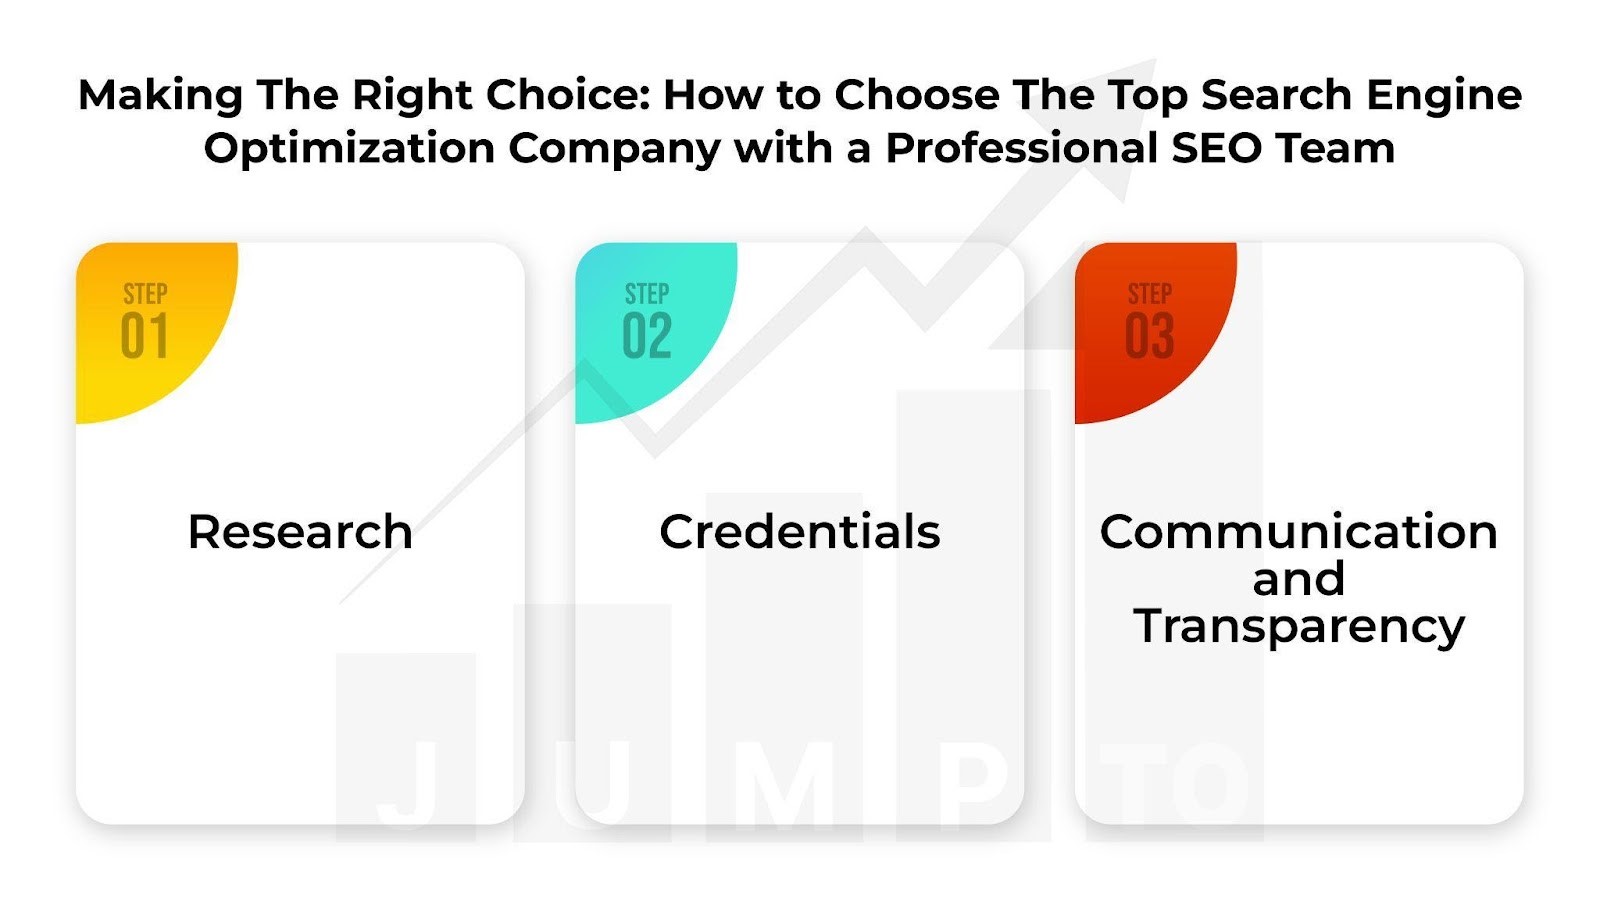 The picture demonstrates tips on choosing the right search engine optimization company with a professional team.
https://jumpto1.com/search-engine-optimization-services/